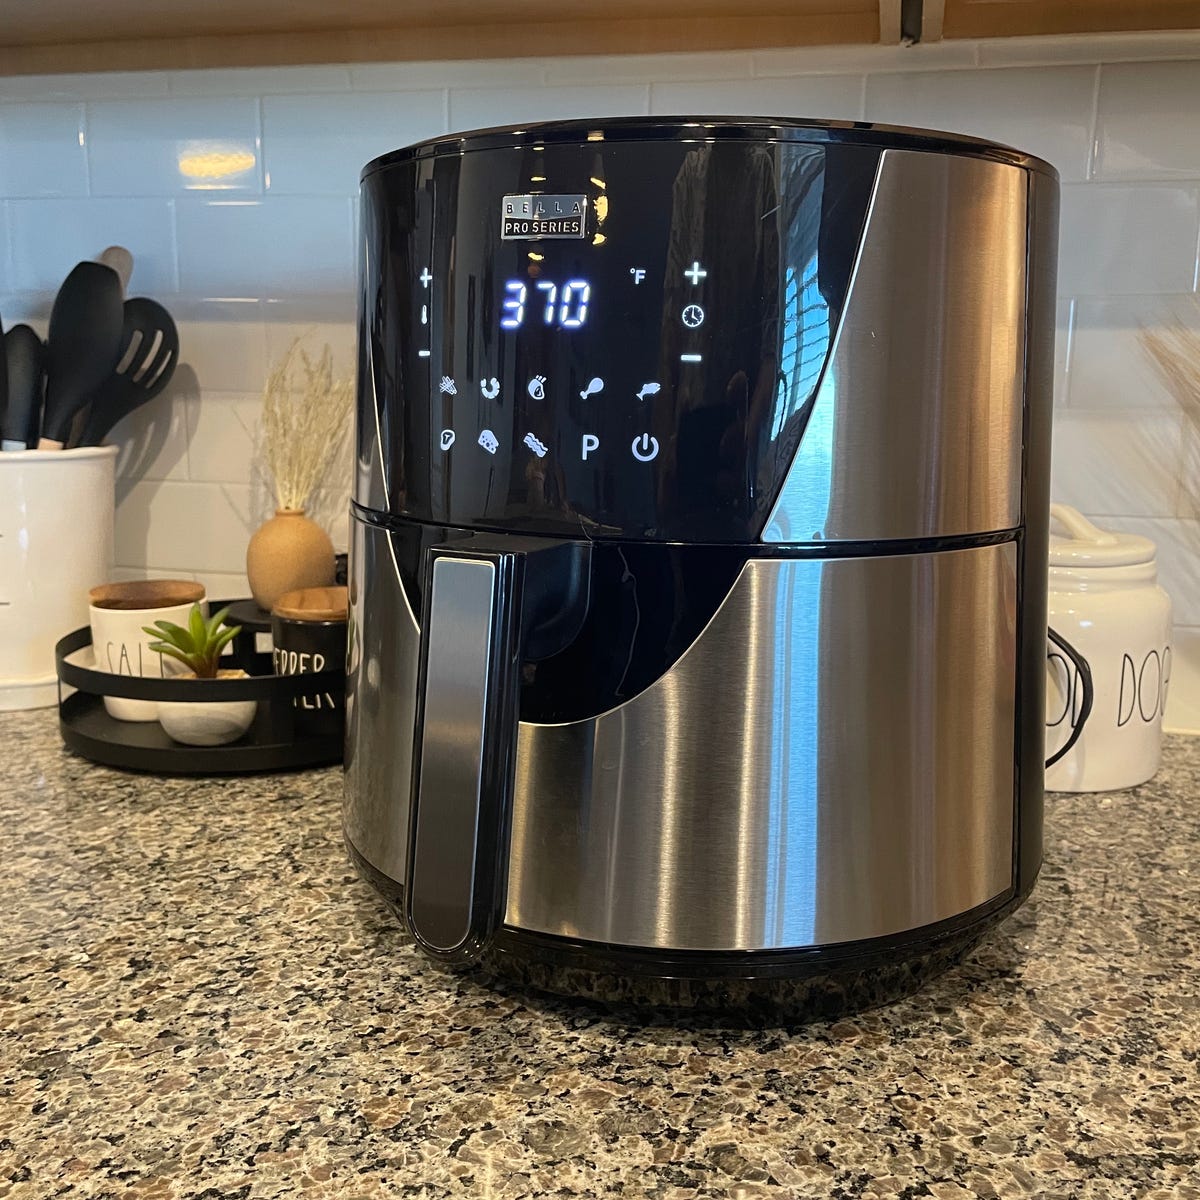 The Air Fryer I Use Nearly Every Day Is on Sale for $60. You Should Buy One  Now - CNET